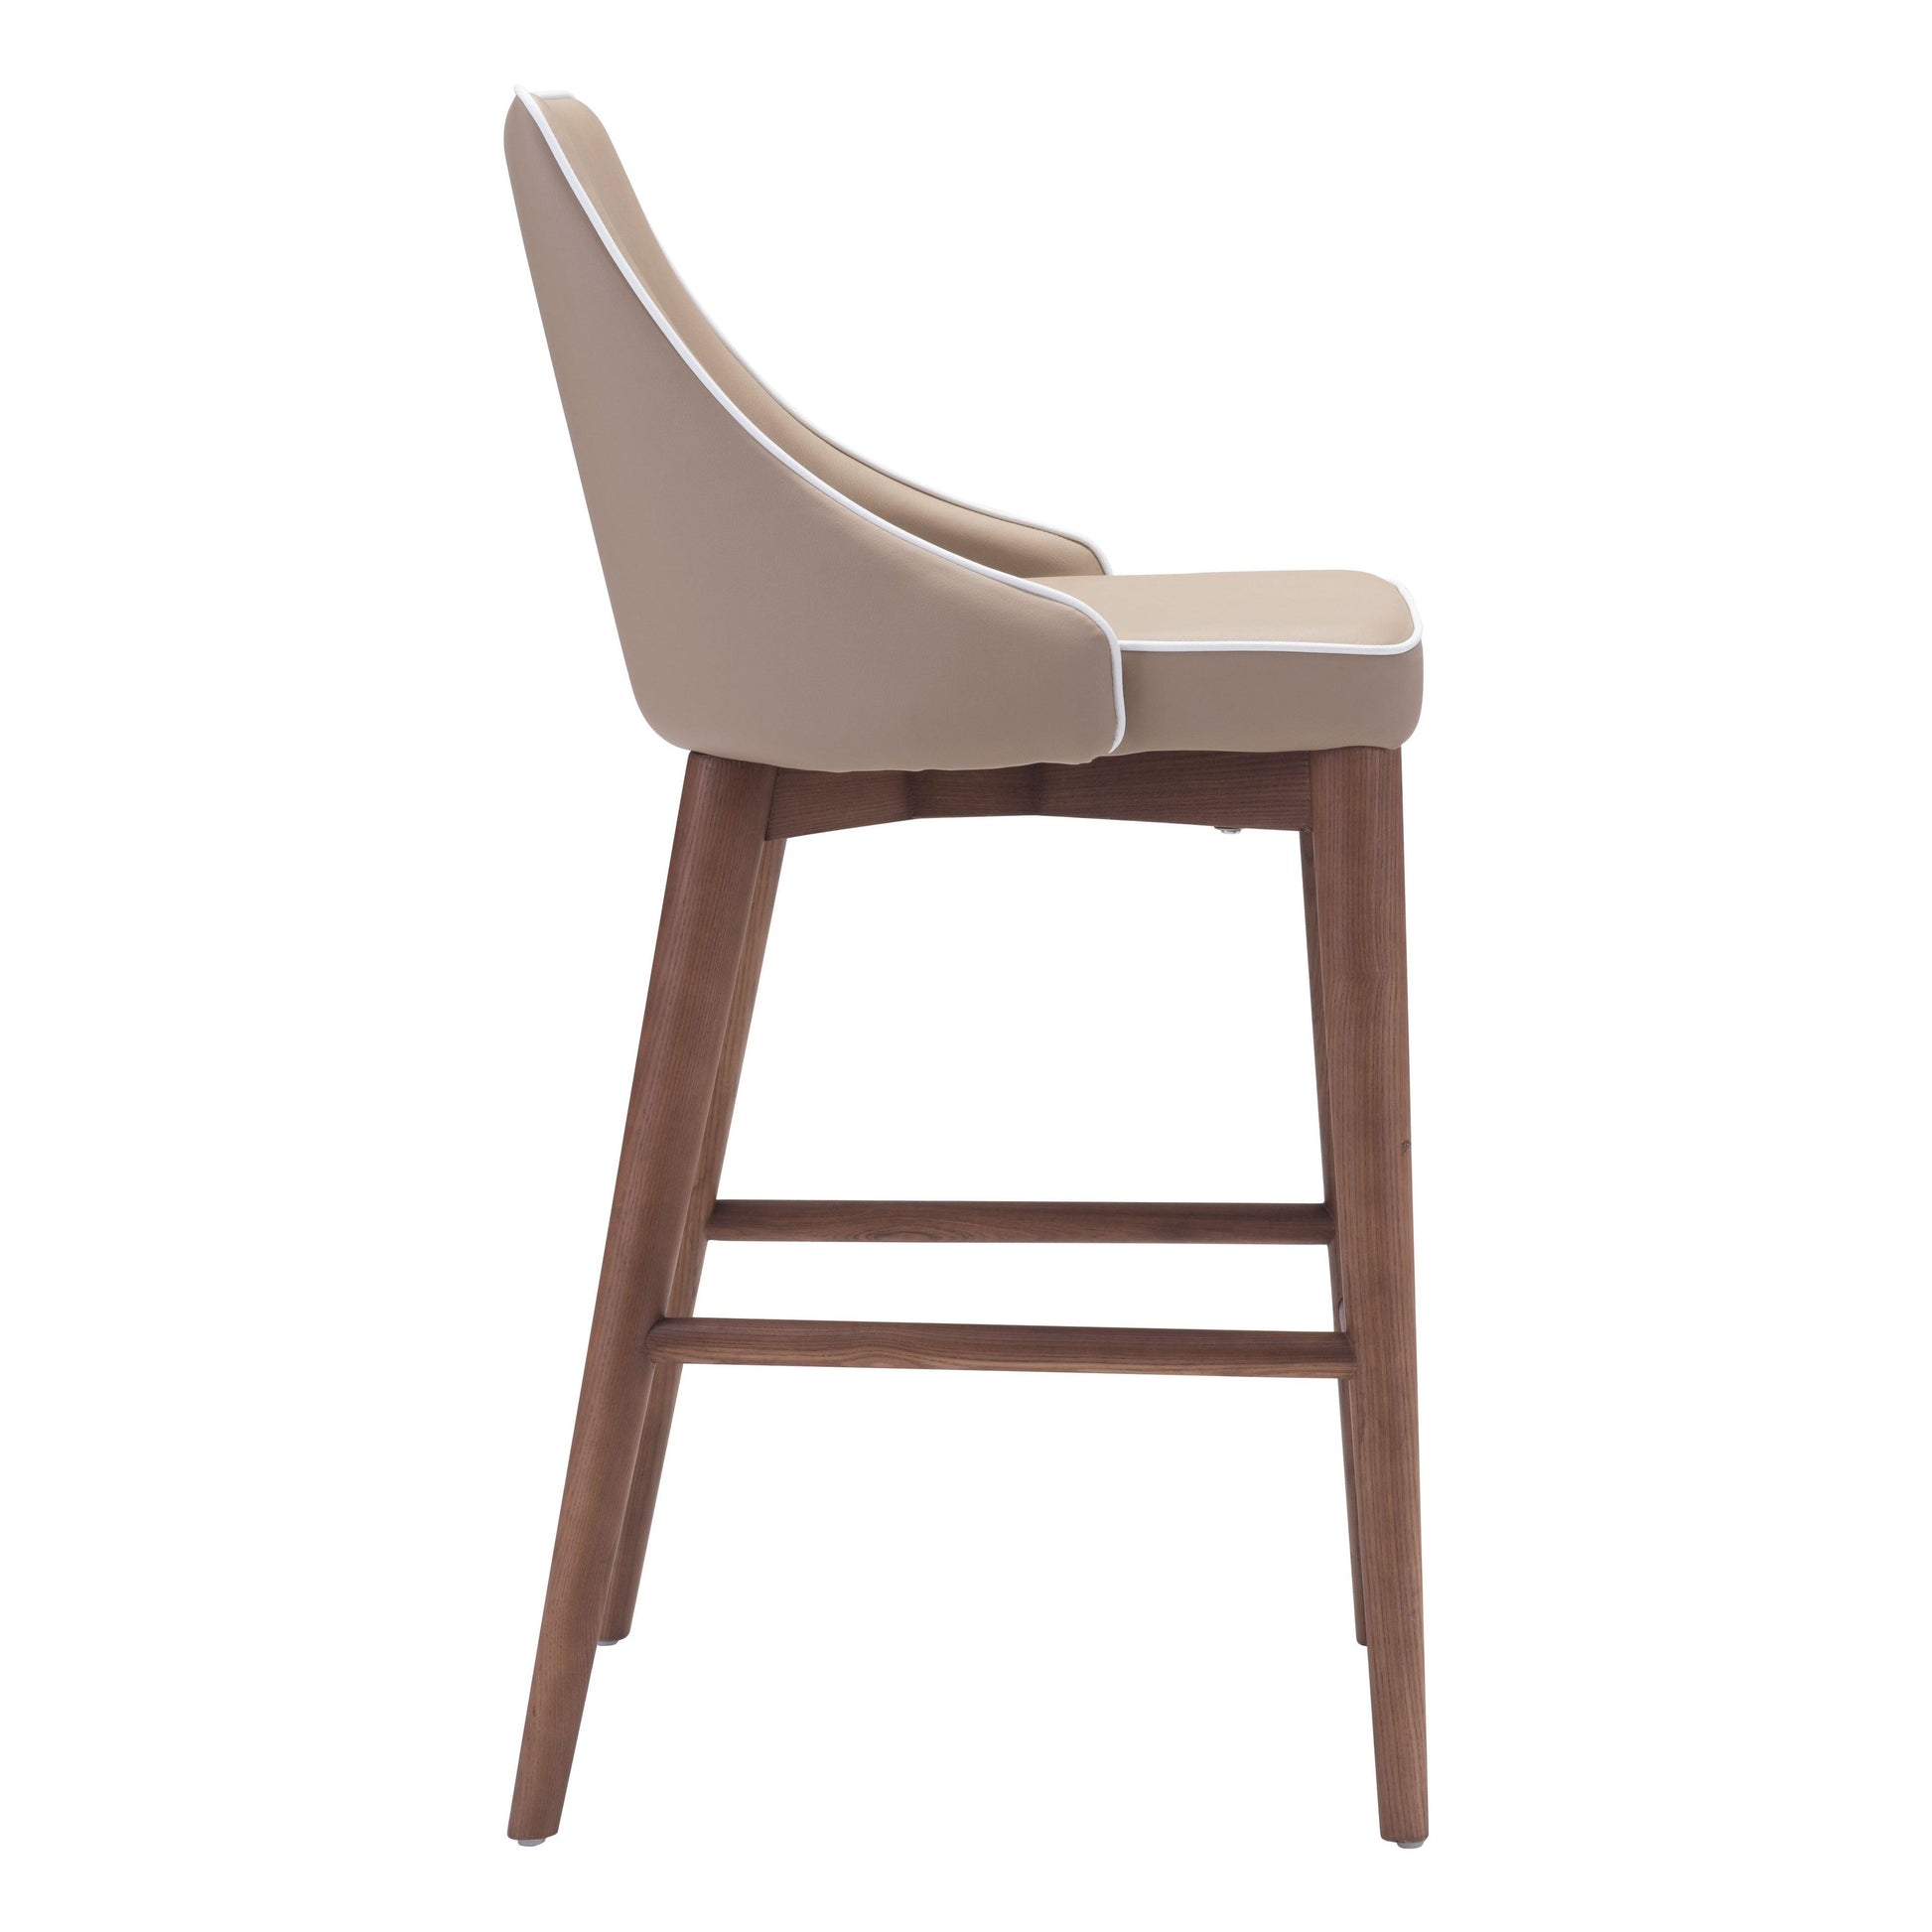 Moor Counter Chair Beige - Sideboards and Things Back Type_With Back, Brand_Zuo Modern, Color_Beige, Color_Brown, Depth_10-20, Height_30-40, Materials_Upholstery, Materials_Wood, Product Type_Counter Height, Upholstery Type_Leather, Upholstery Type_Vegan Leather, Width_10-20, Wood Species_Birch, Wood Species_Plywood